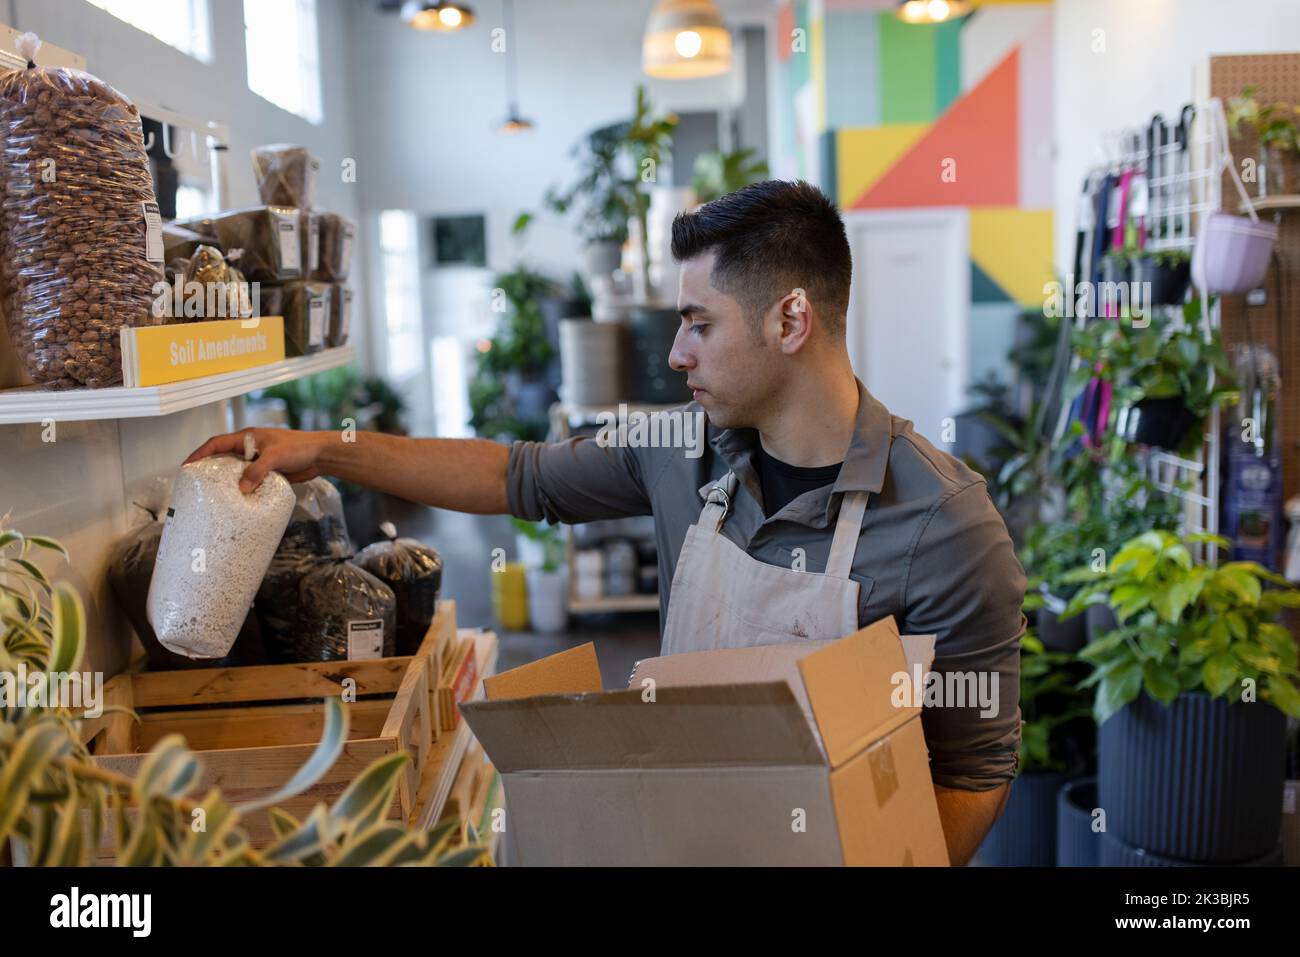 Male plant shop owner arranging inventory Stock Photo